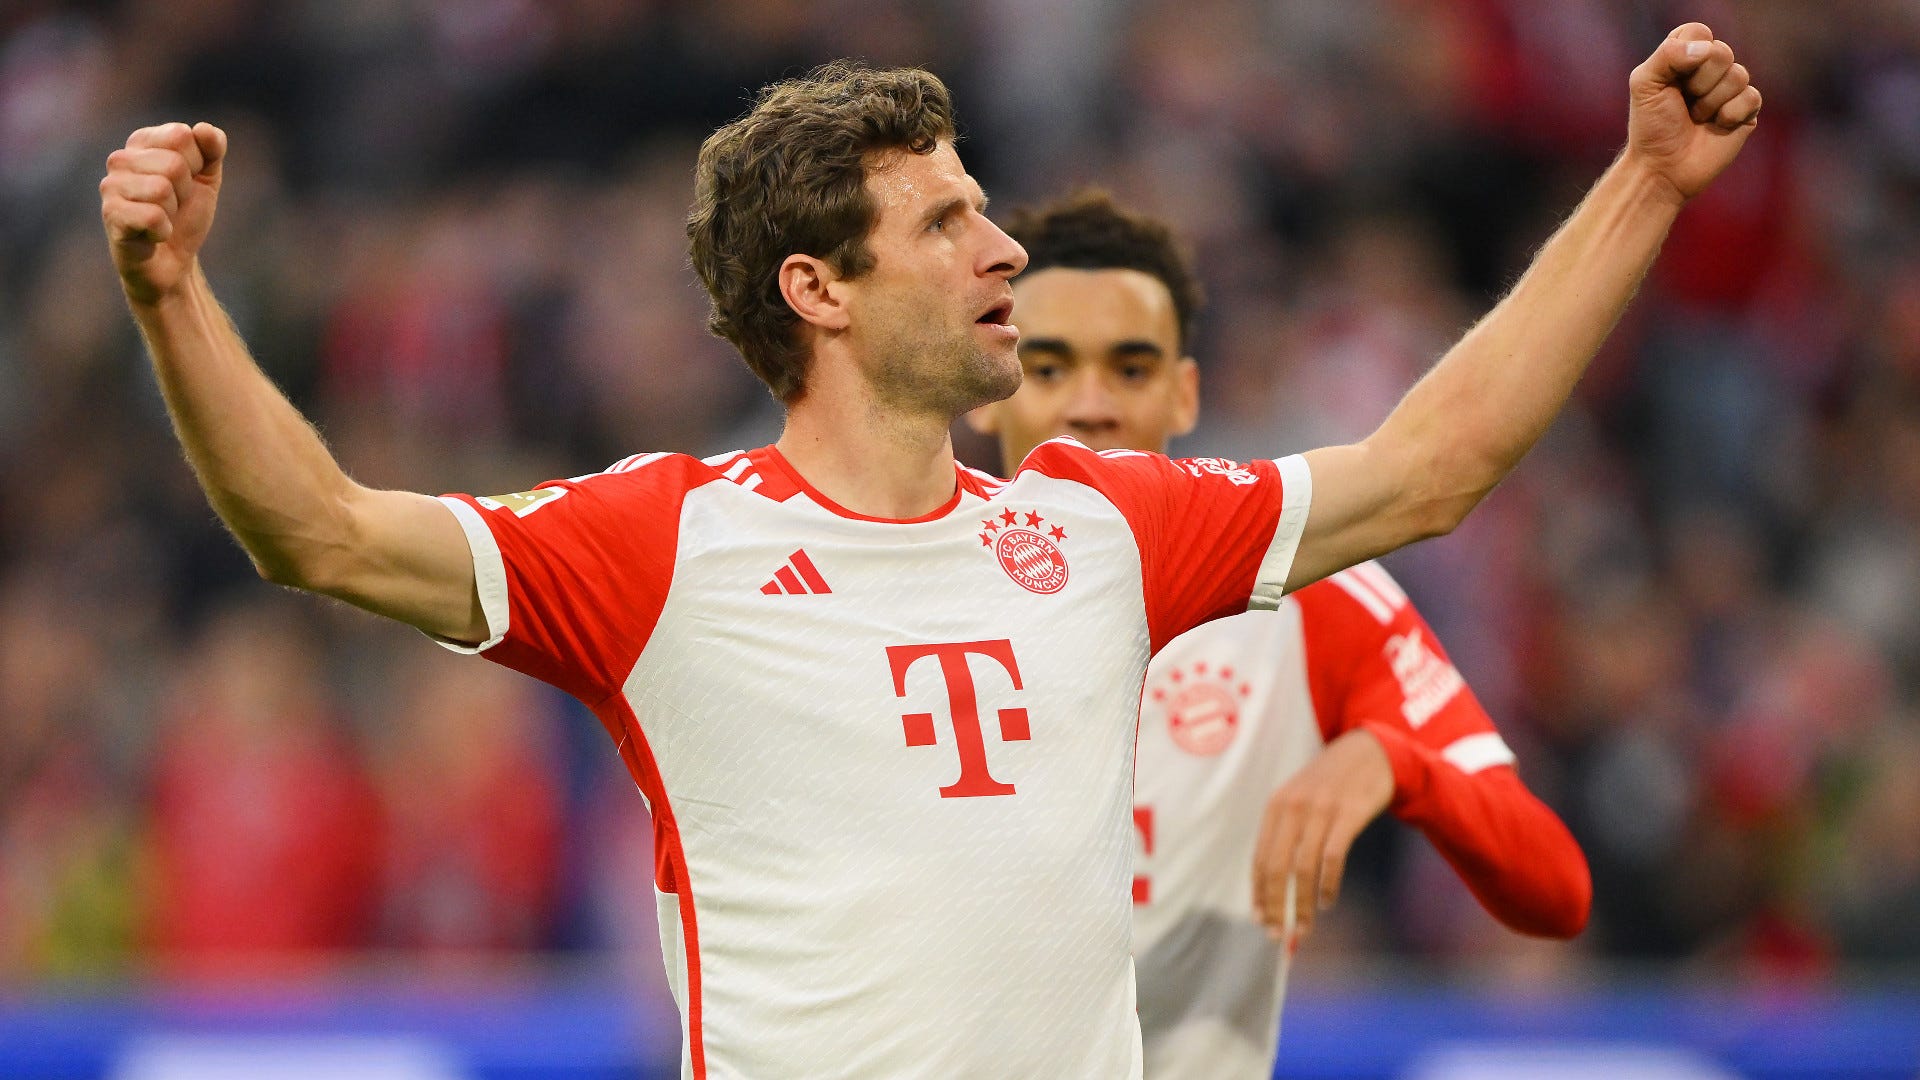 Saarbrucken vs Bayern Munich Live stream, TV channel, kick-off time and where to watch German Cup game Goal UK